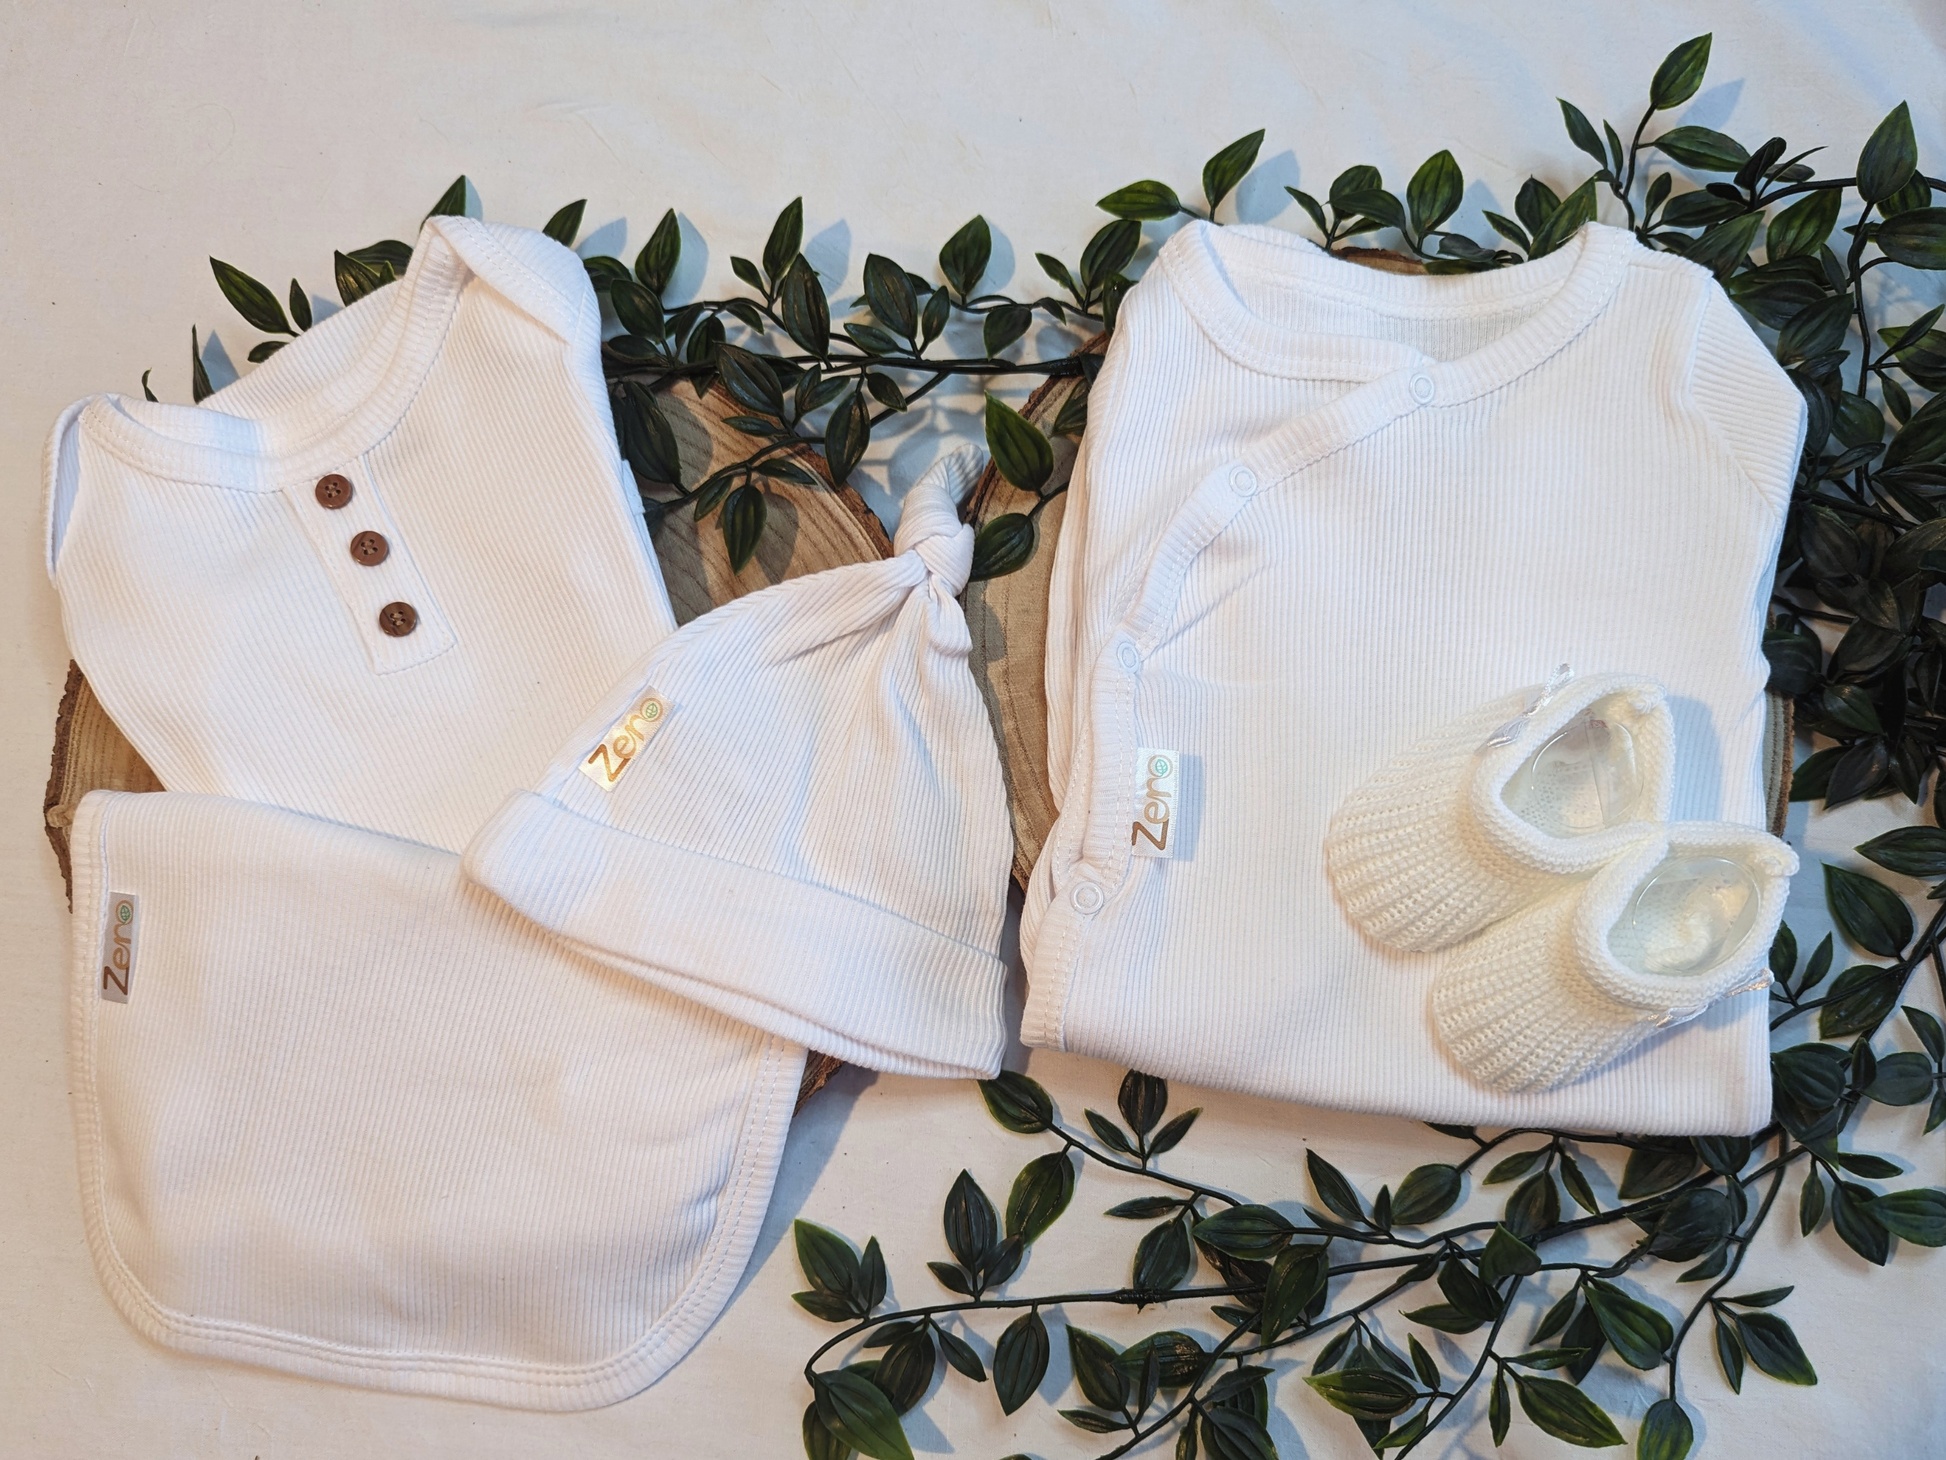 Unisex Baby Clothes - Baby bib in white, ribbed design. Perfect unisex newborn clothing accessory. Featured in a picture with other matching unisex newborn clothes and complementary iteams such as baby booties, baby giraffe teddy and baby mittens available on the loobylu baby website.